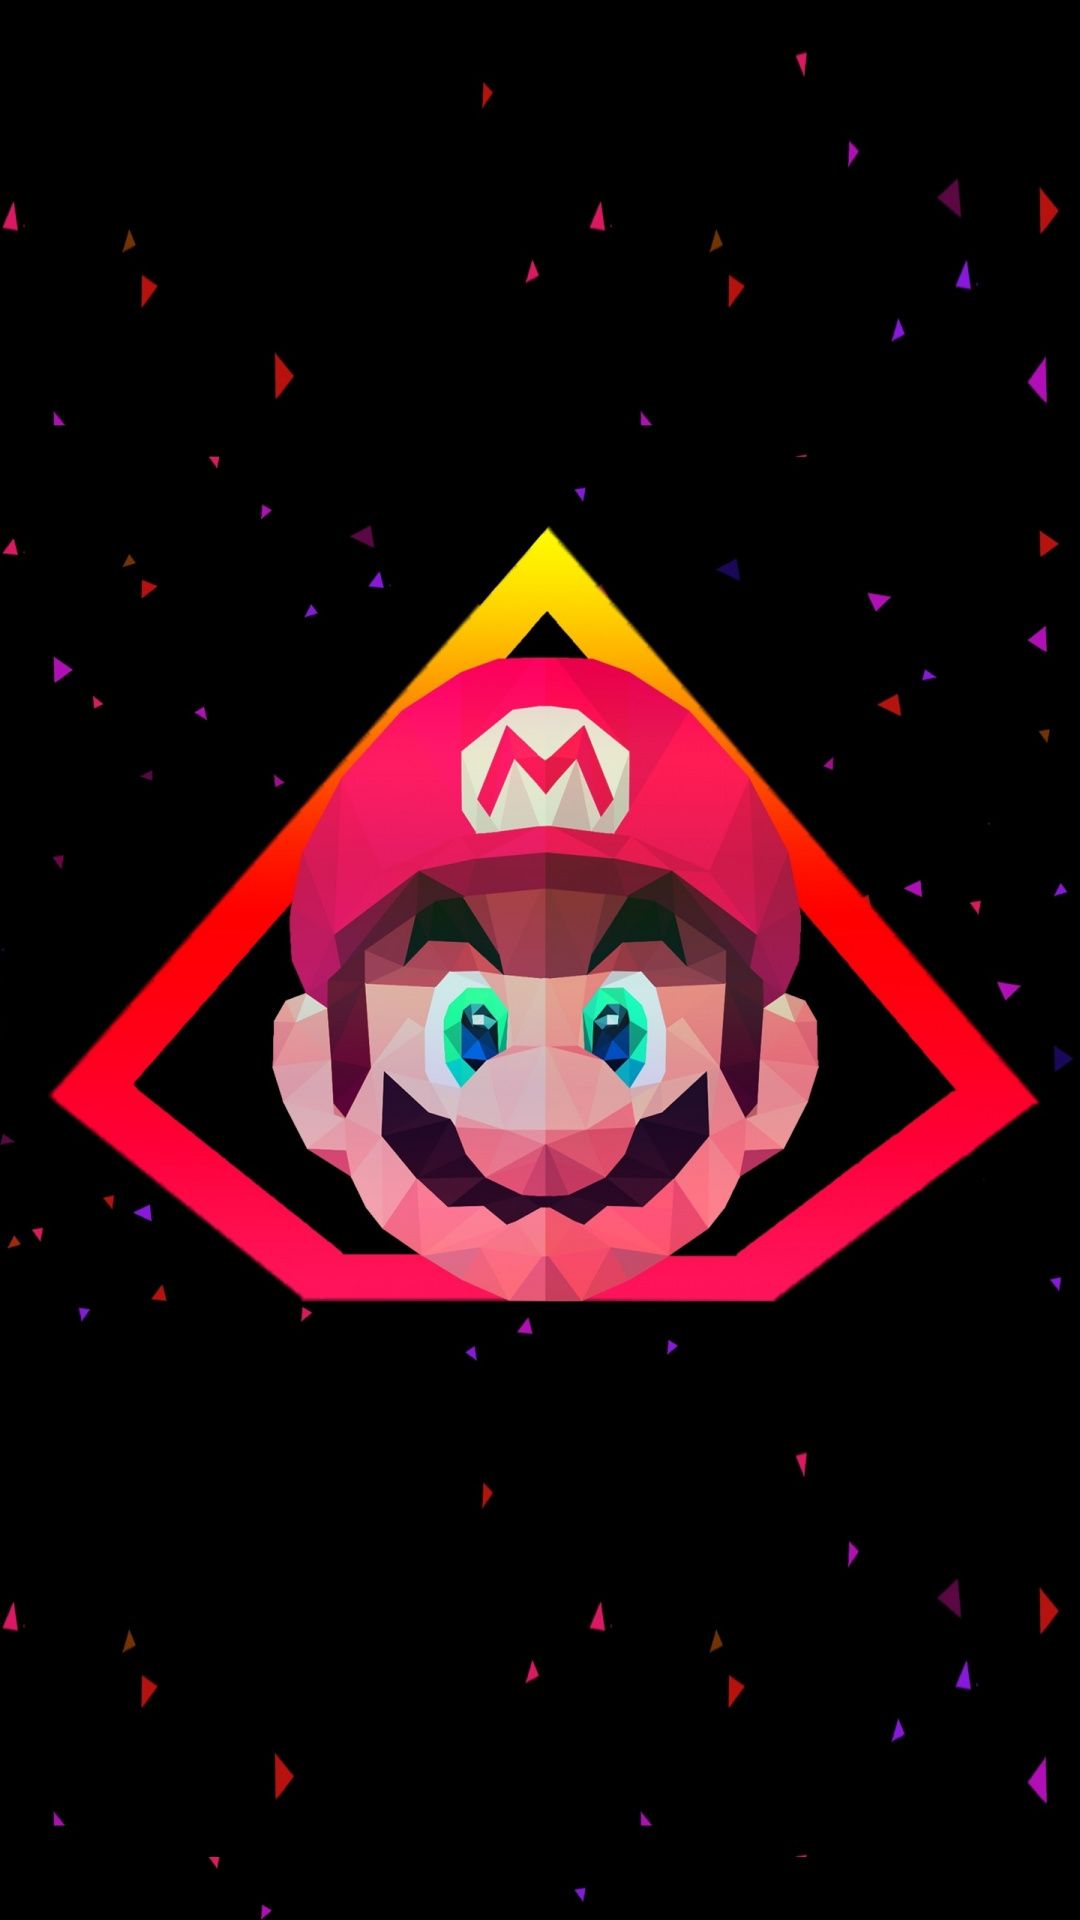 Mario, video game, character, low poly, art, 1080x1920 wallpaper. iPhone background, Wallpaper, Hipster picture